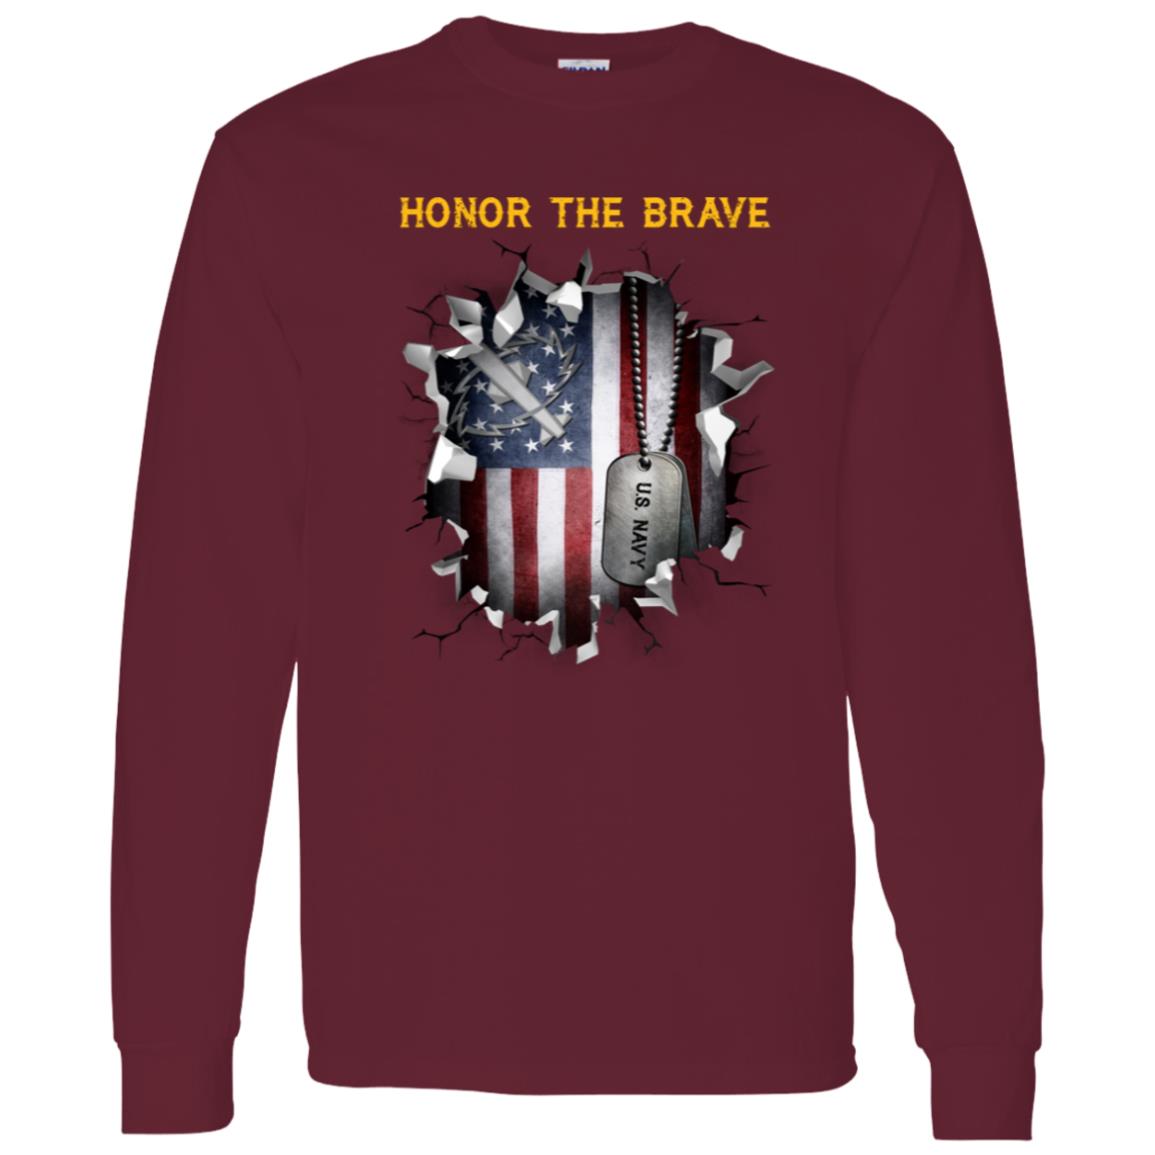 Navy Missile Technician Navy MT - Honor The Brave Front Shirt